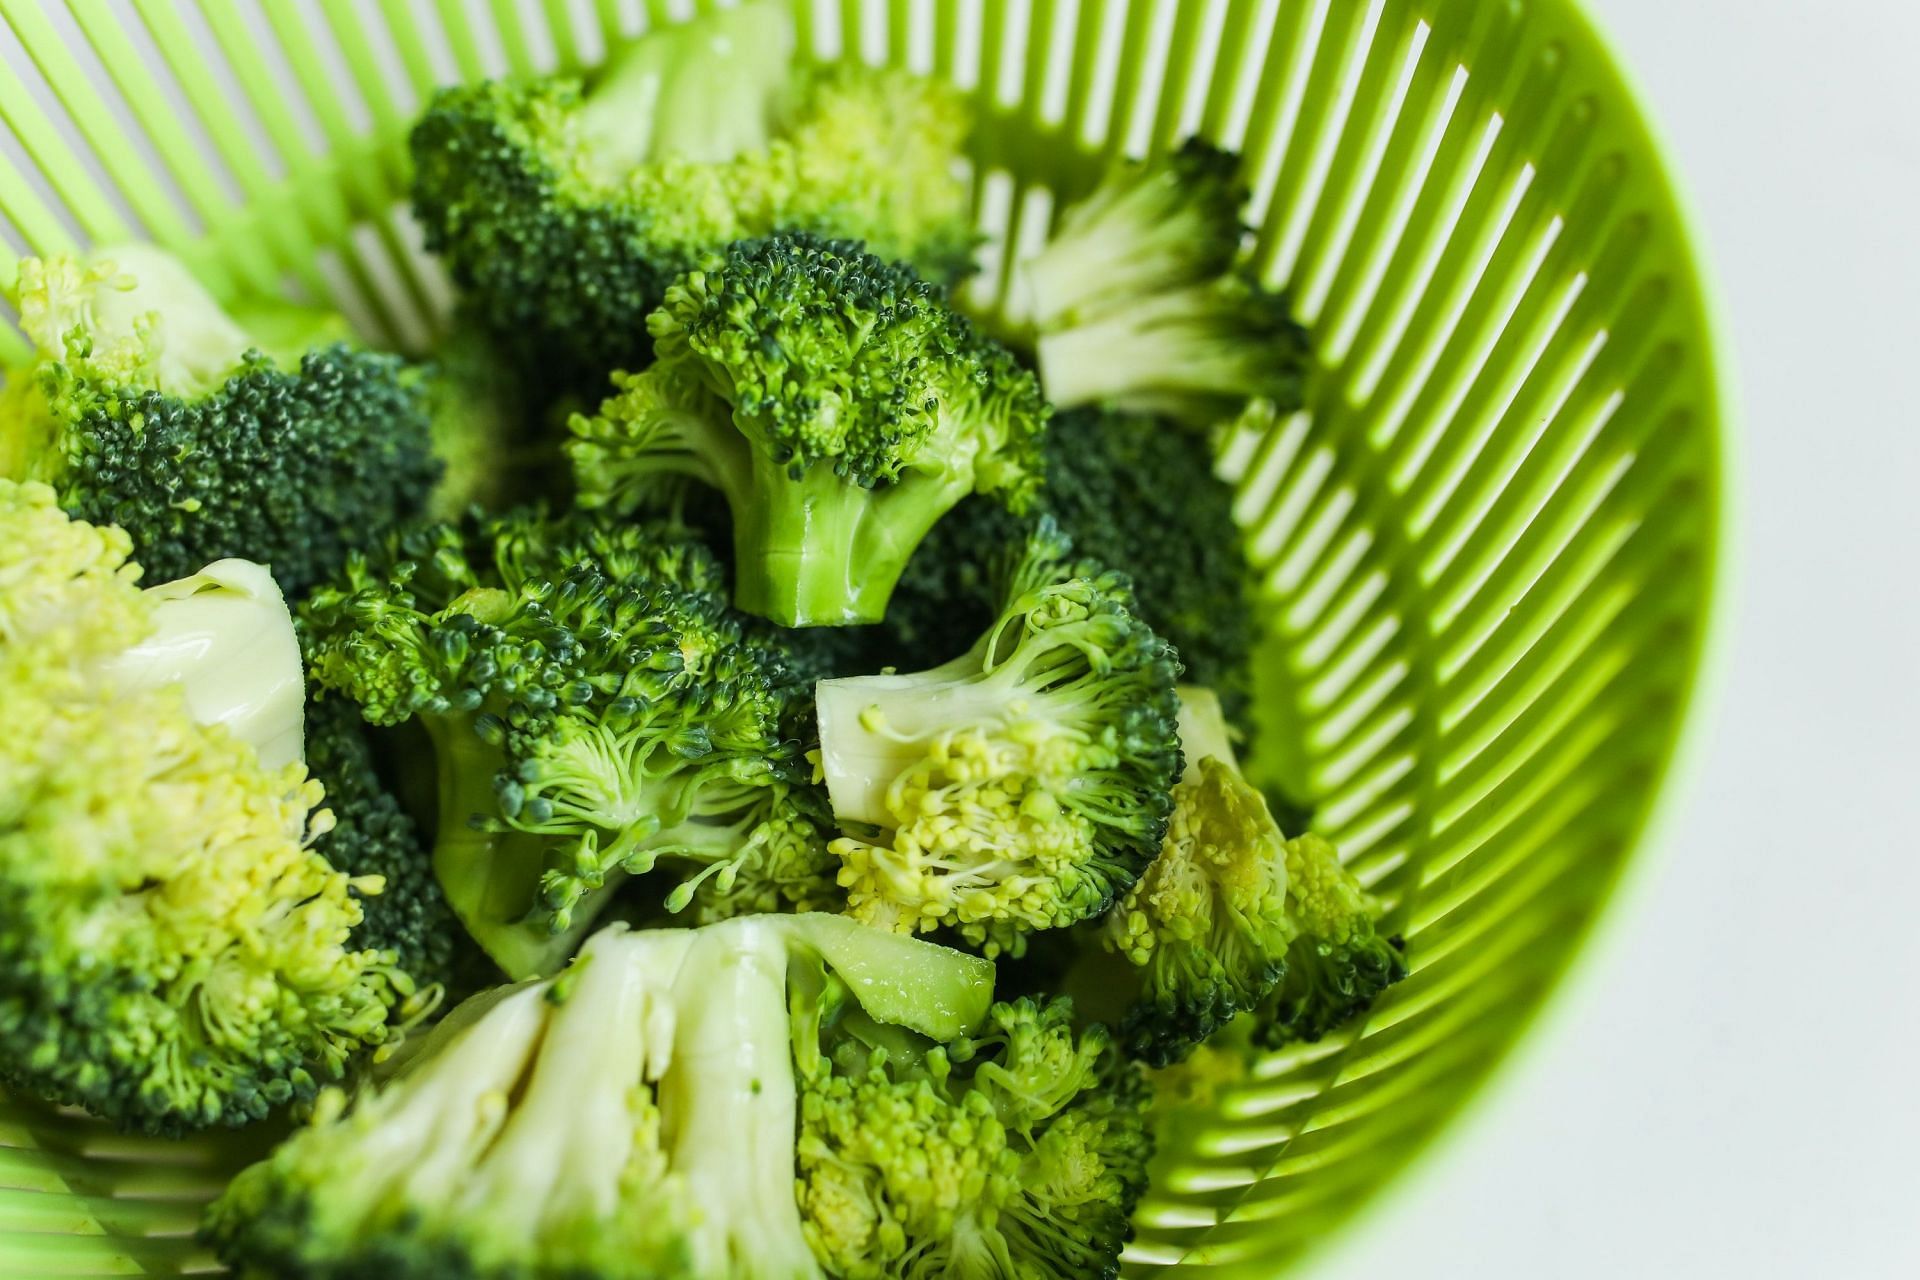 Foods for hair growth: Broccoli is rich in potassium. (Image via Pexels / Polina Tankilevitch)